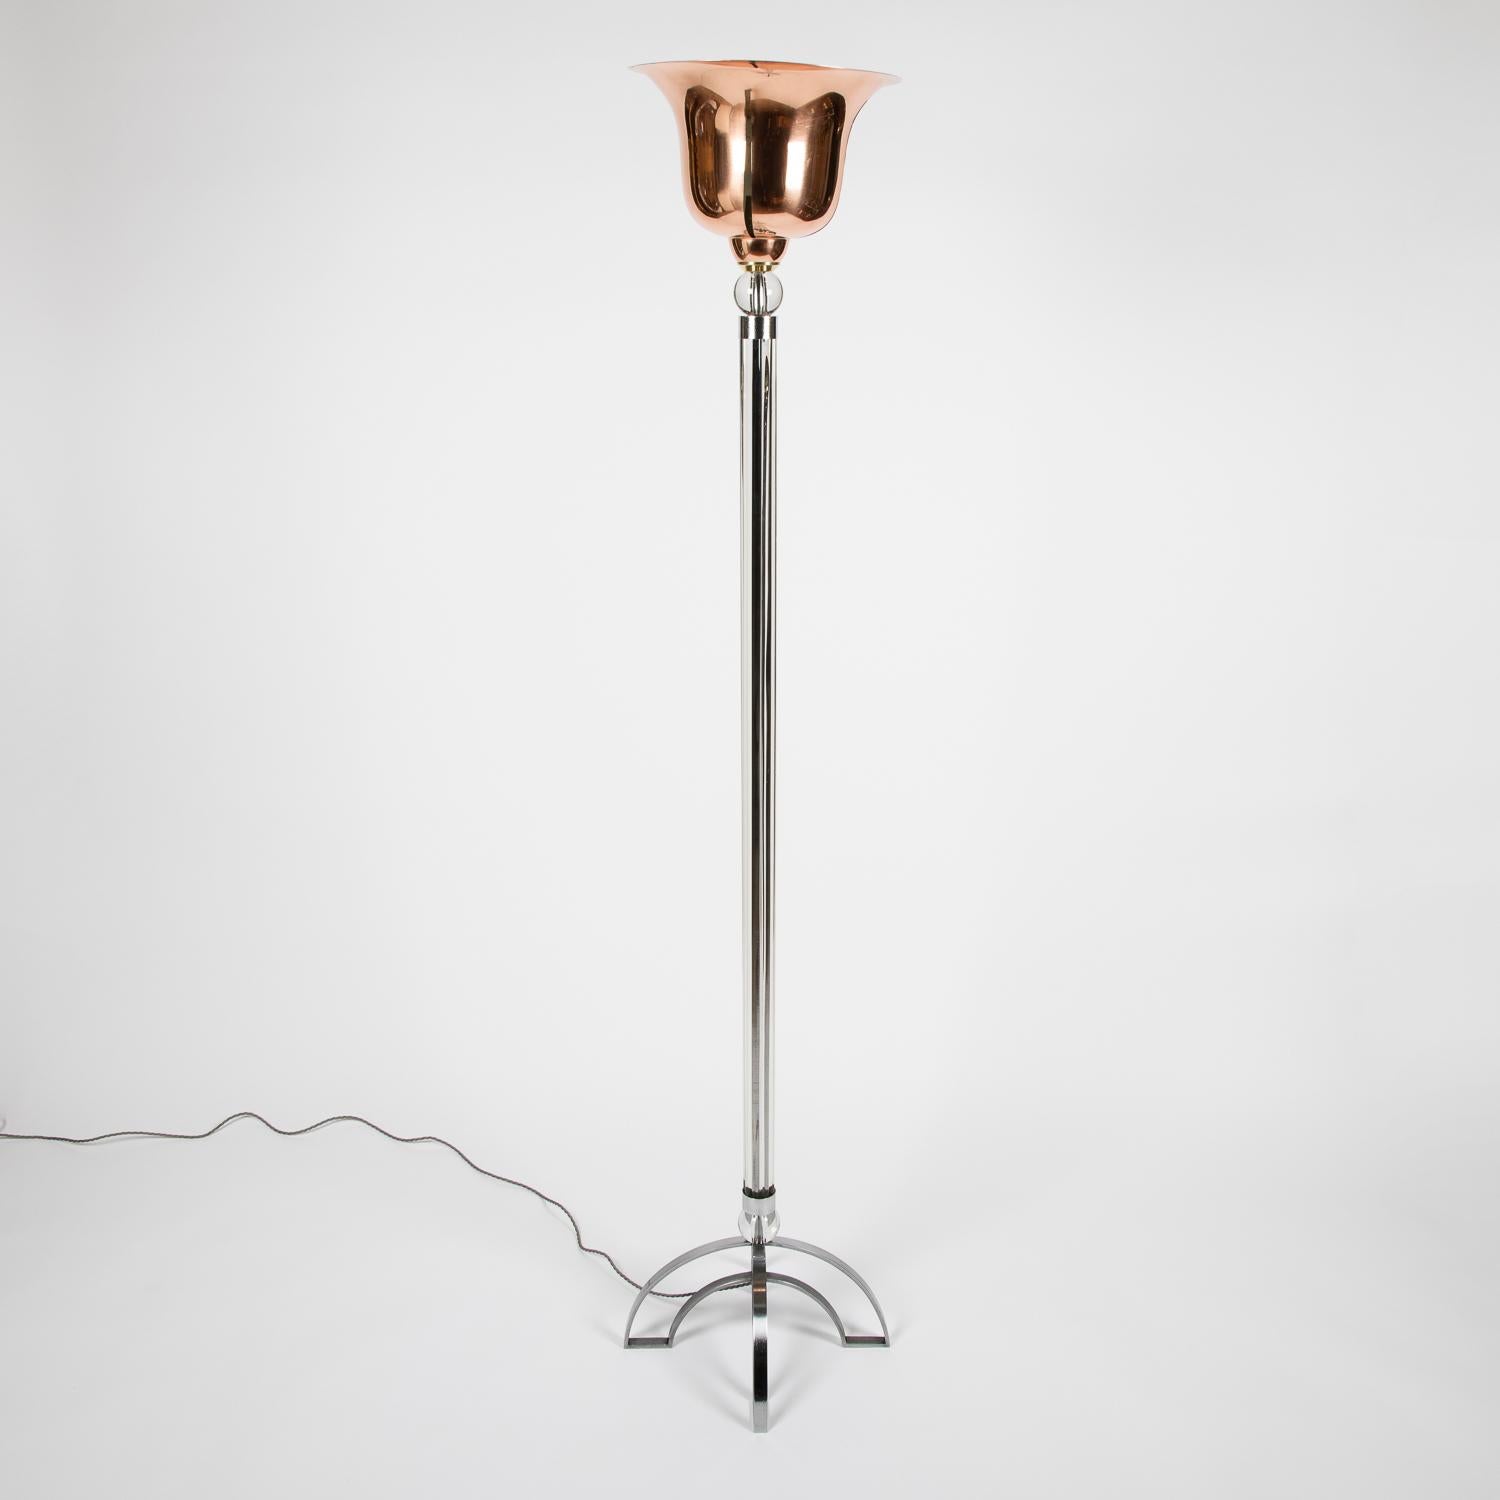 A mid twentieth century glass and copper standard lamp.

Rewired and tested.